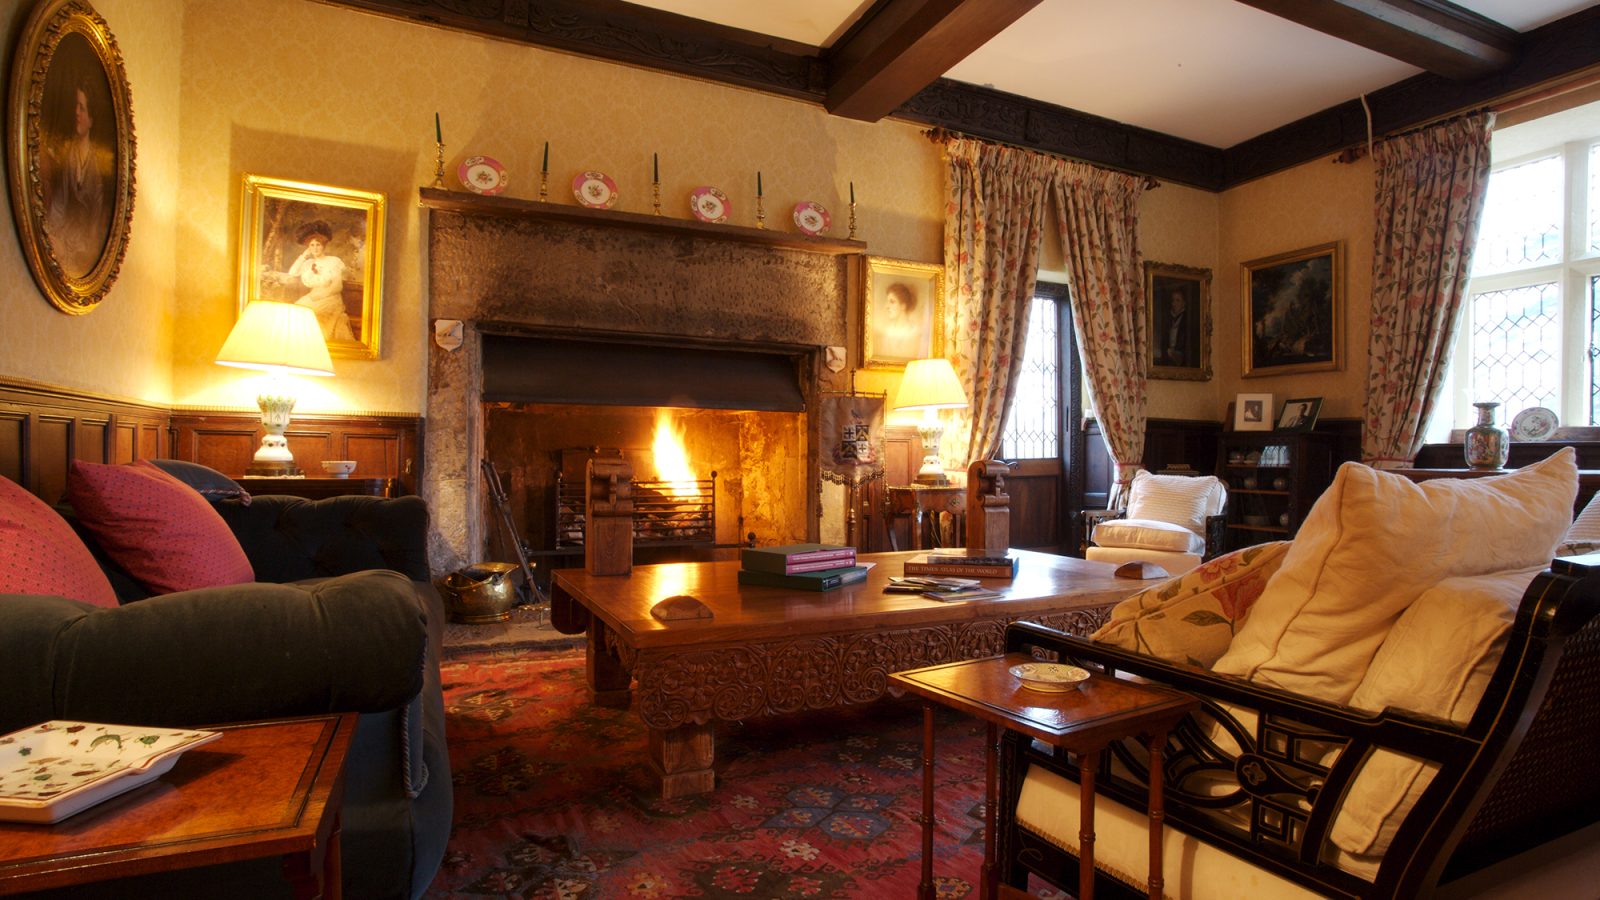  The Jacobean Hall - kate & tom's Large Holiday Homes